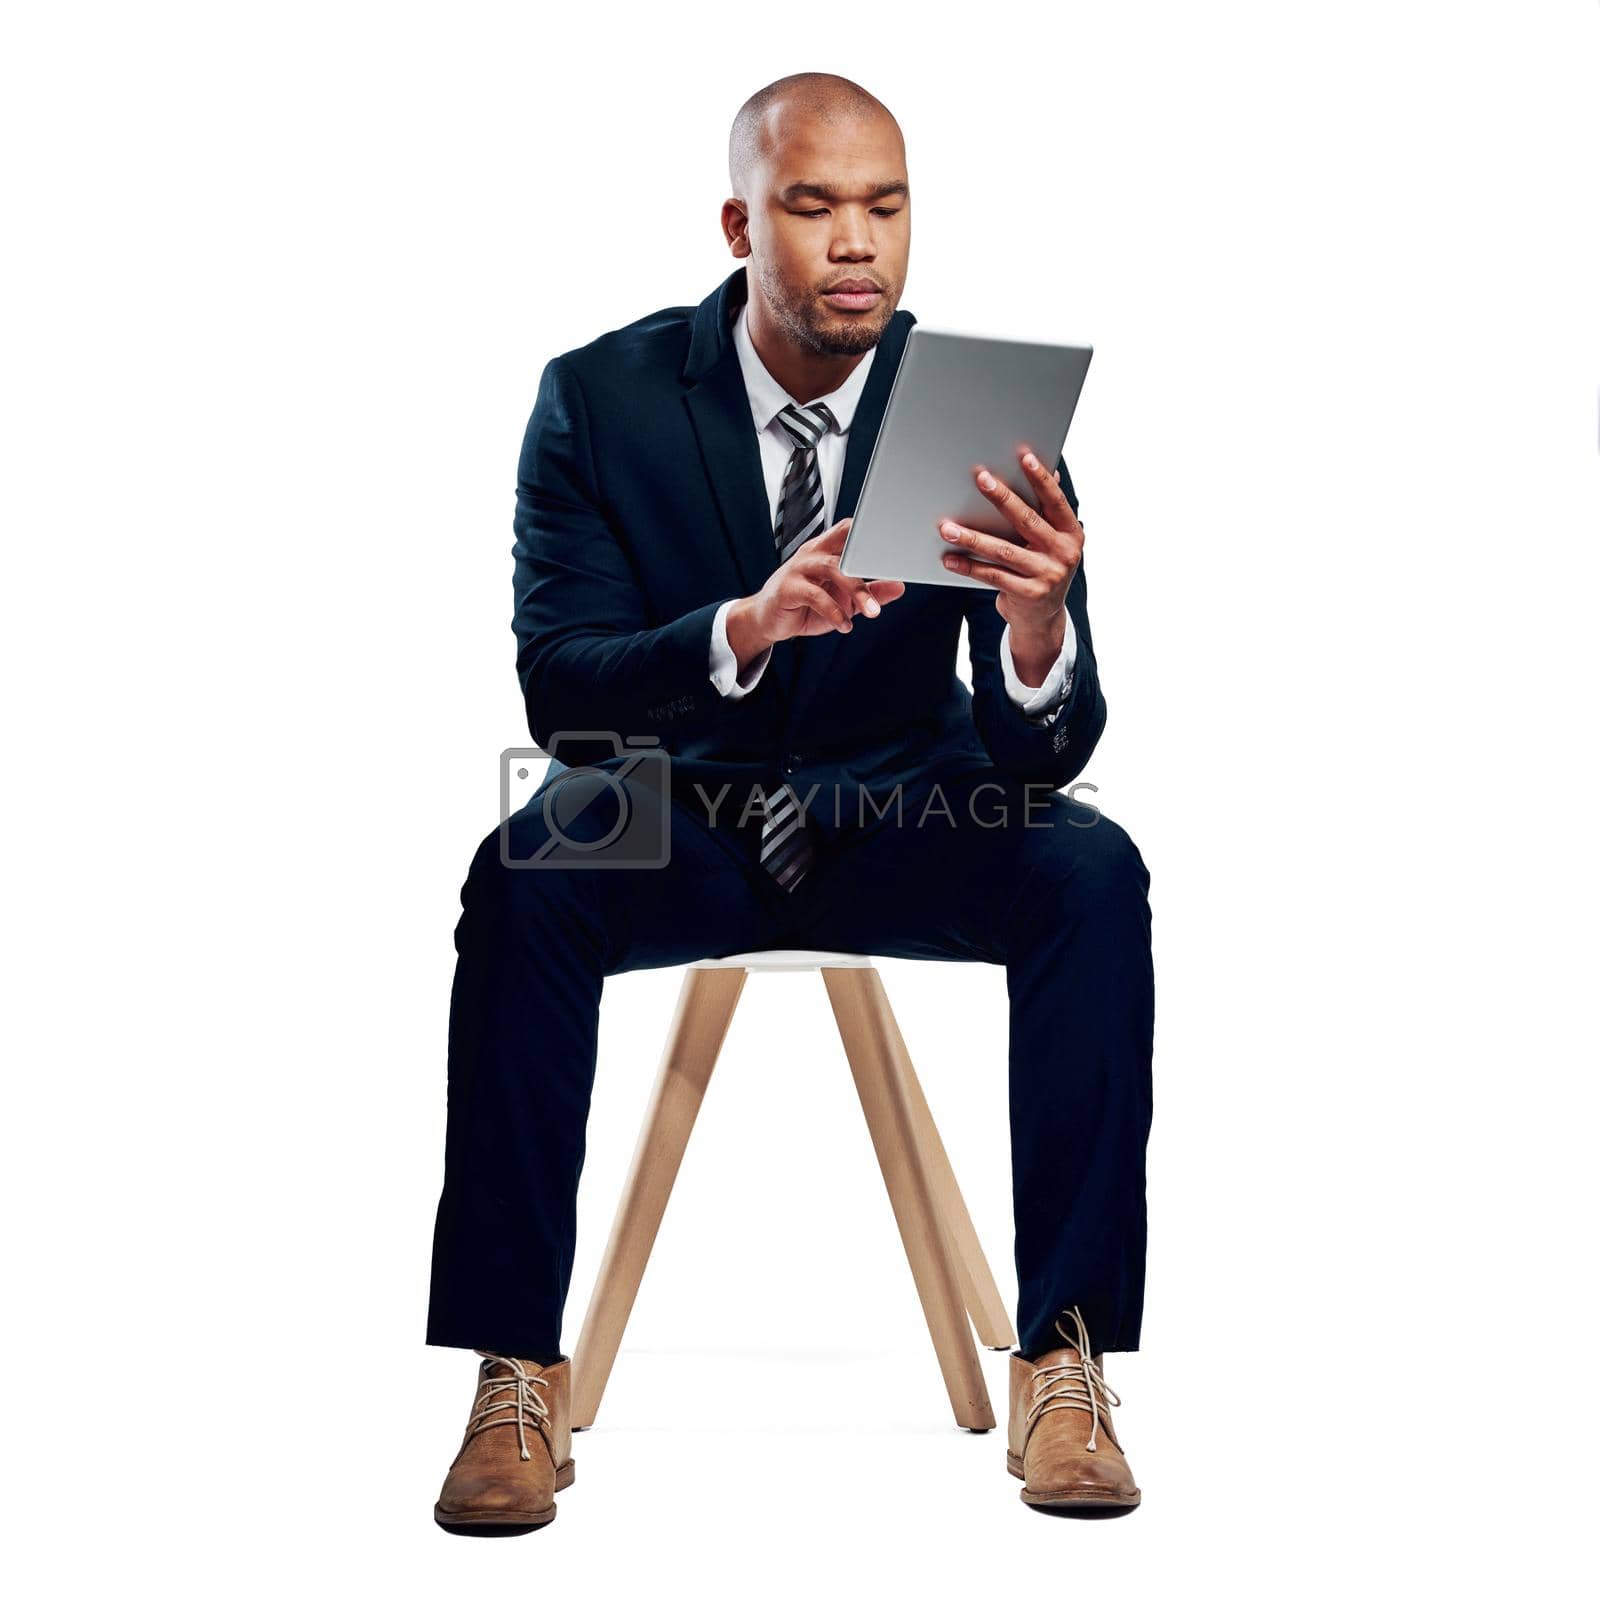 Royalty free image of Fast connectivity for the modern businessman. Studio shot of a handsome young businessman using a tablet against a white background. by YuriArcurs